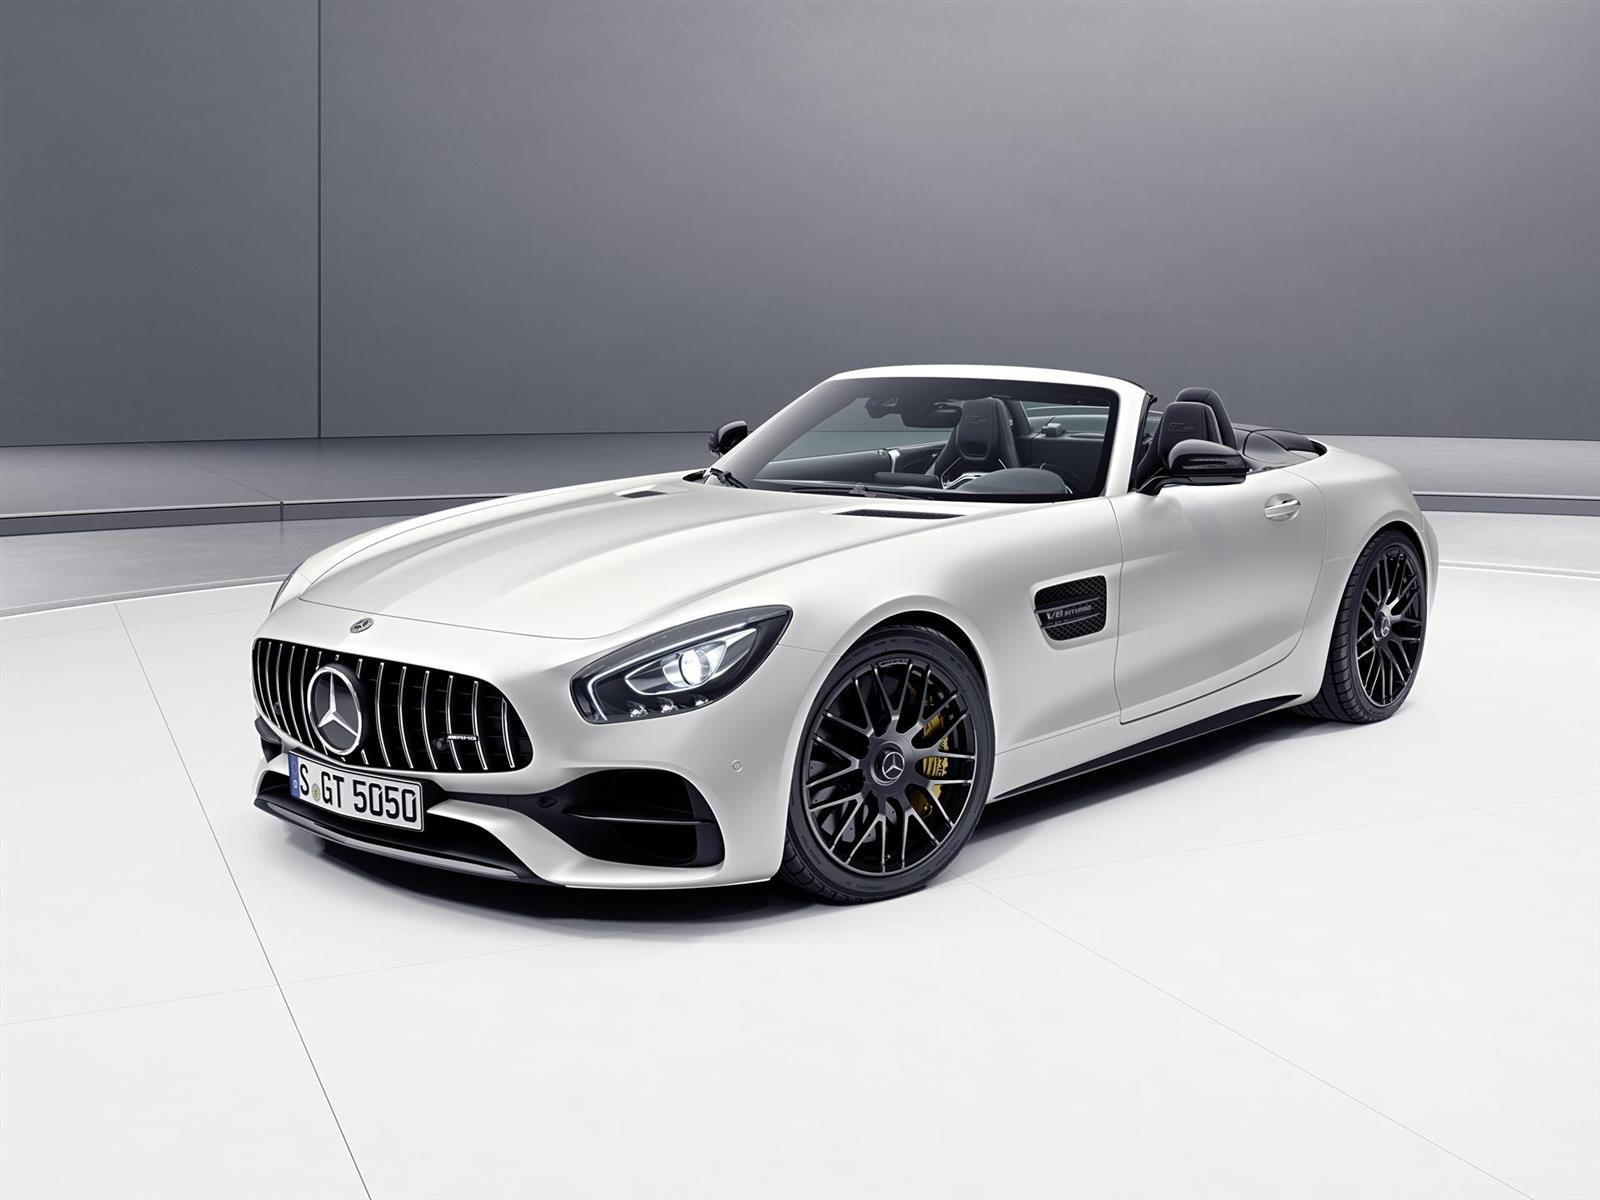 2017 Mercedes-Benz AMG GT C Roadster Edition 50